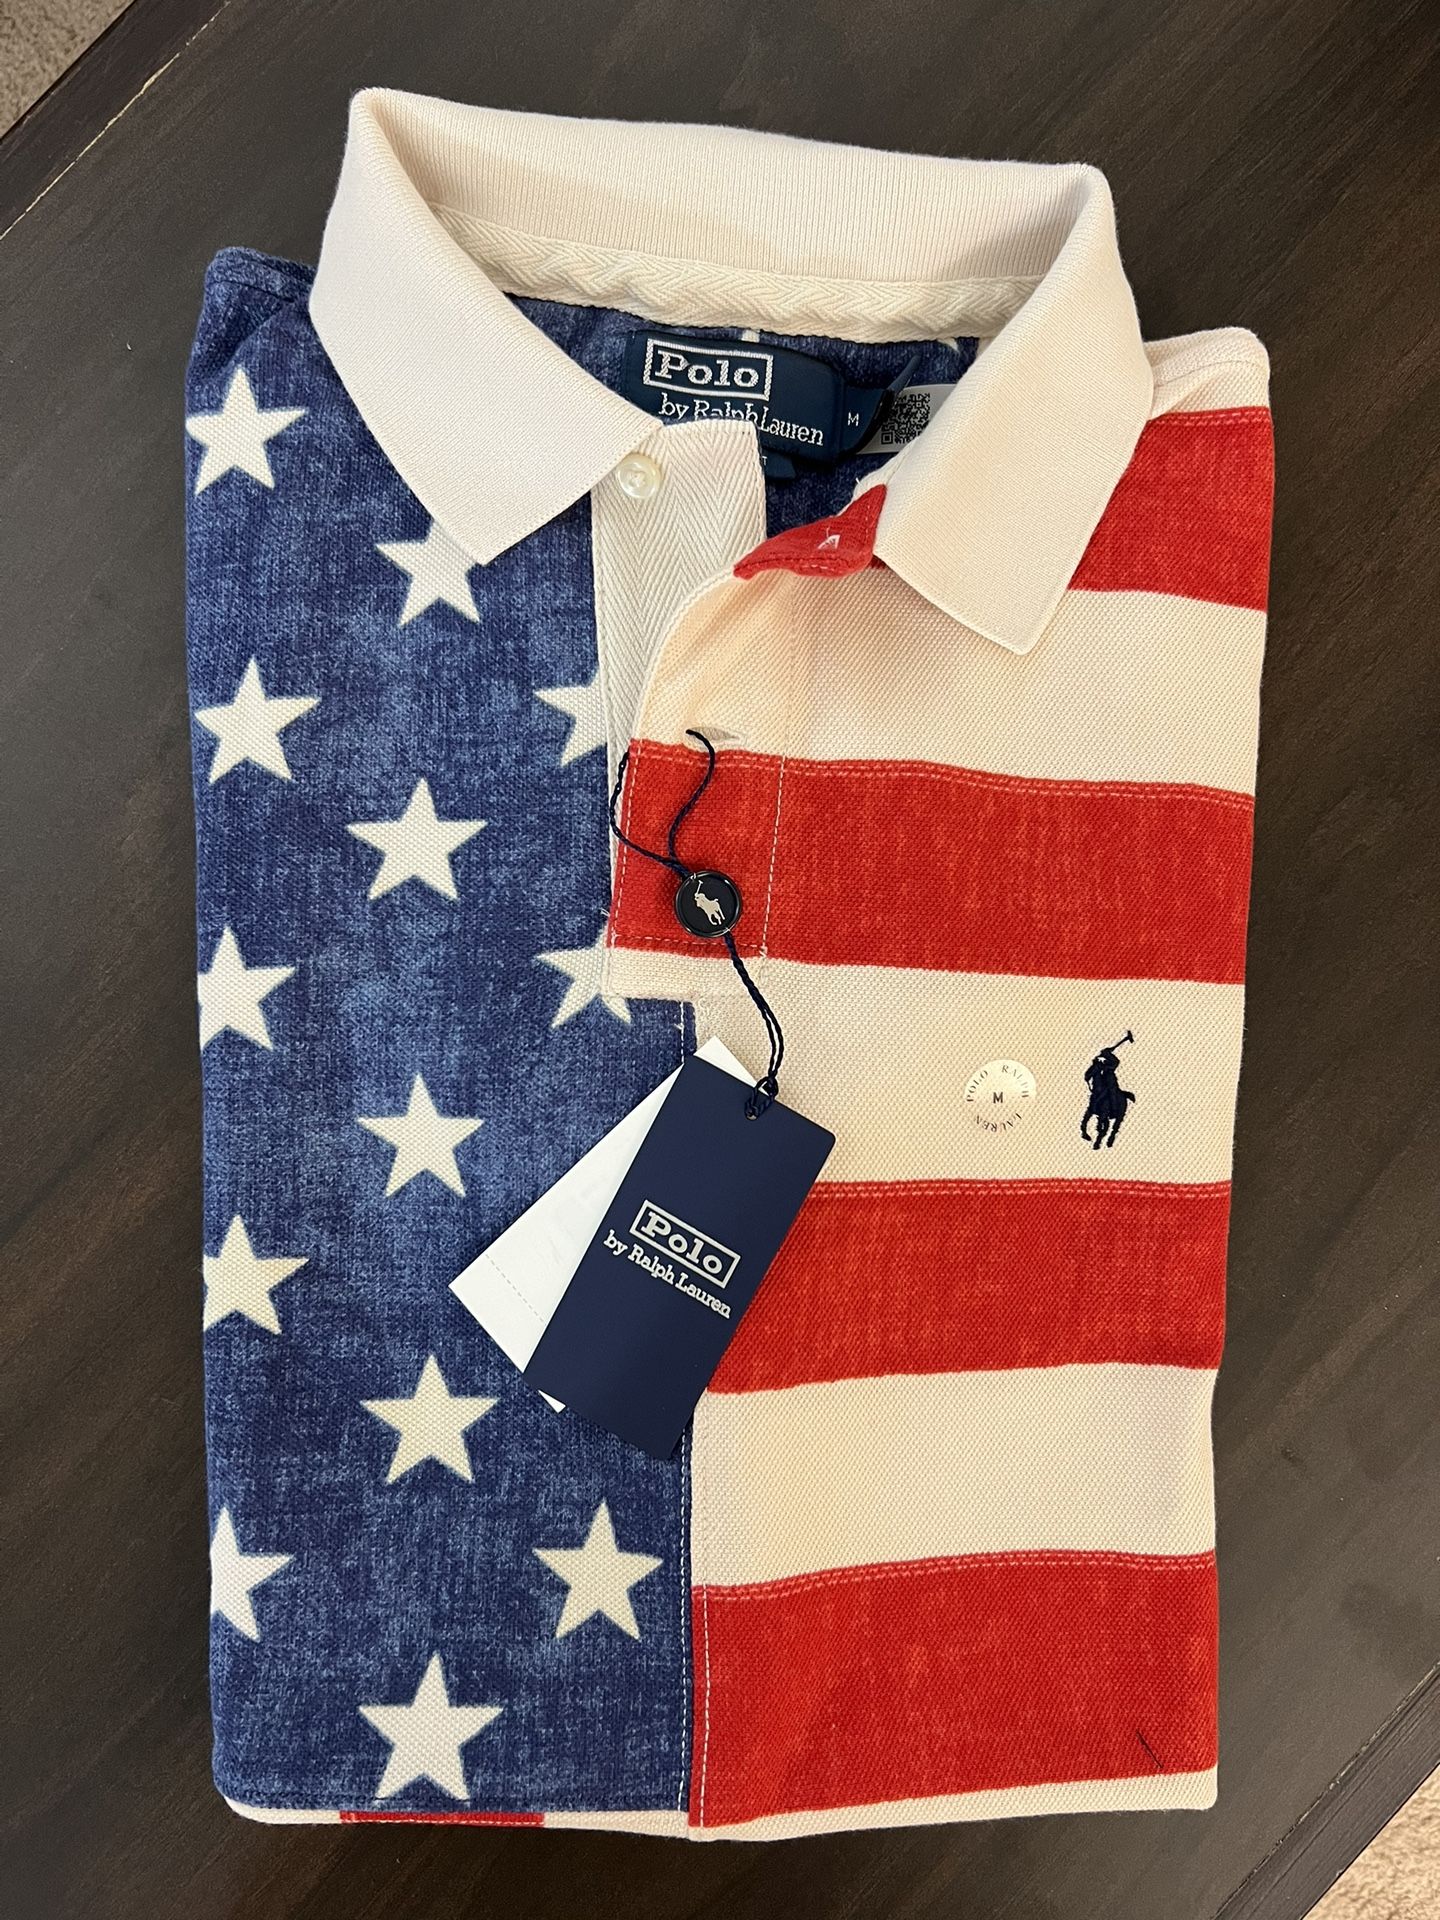 Polo Ralph Lauren T Shirt - New with Tags - Size M (med)